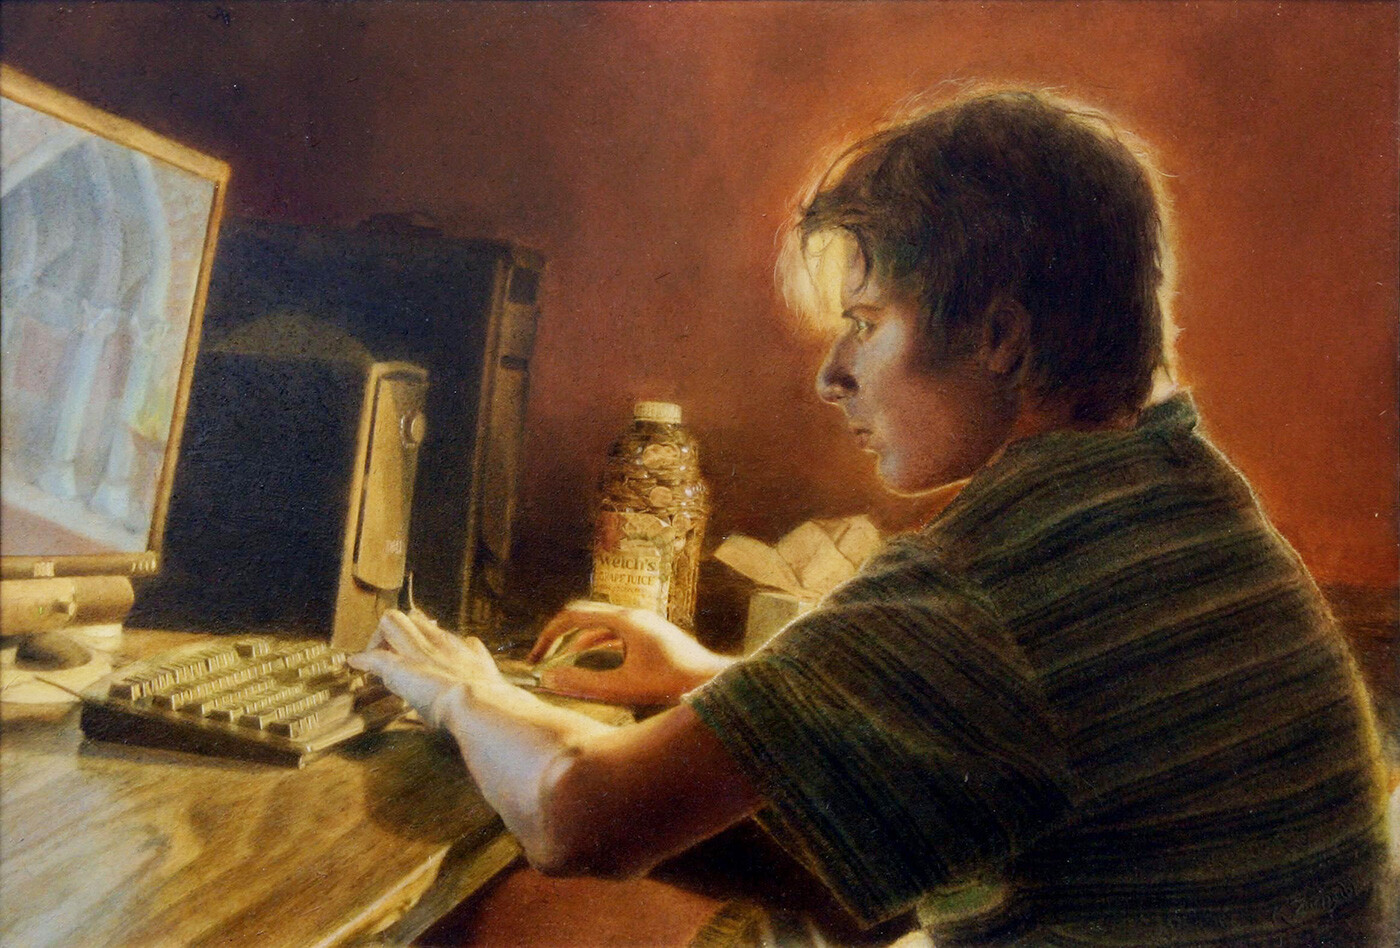 (Age 17) - "The Escape"
An oil on board portrait of my brother playing video games.
I was interested in the painting techniques of the old Flemish masters, but of modern subjects.